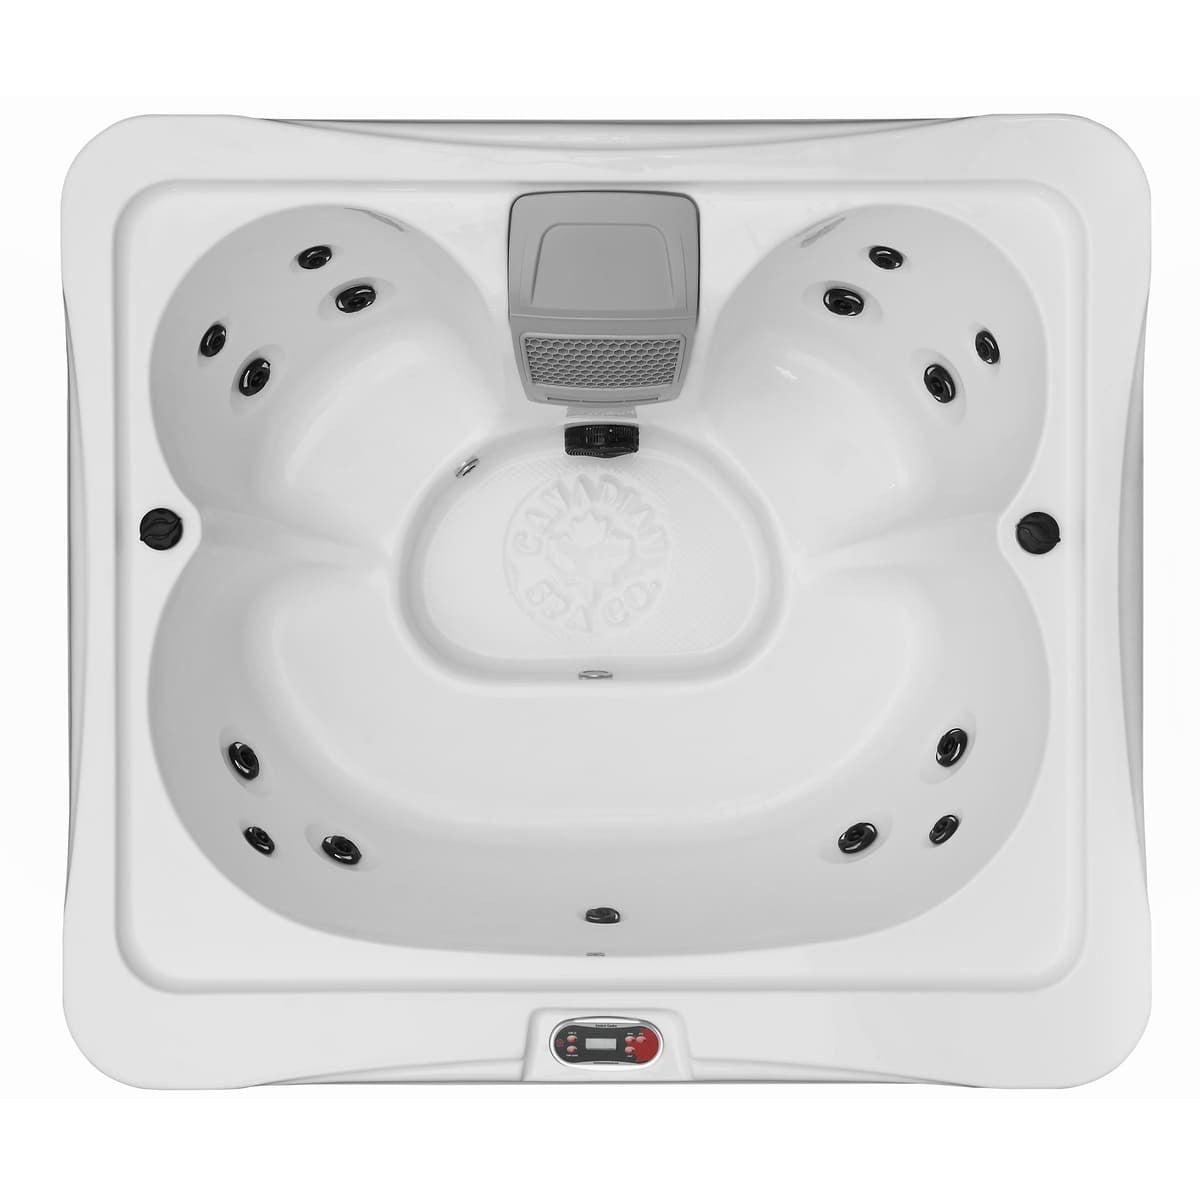 Canadian Spa Granby 4 Person 15-Jet Portable Hot Tub